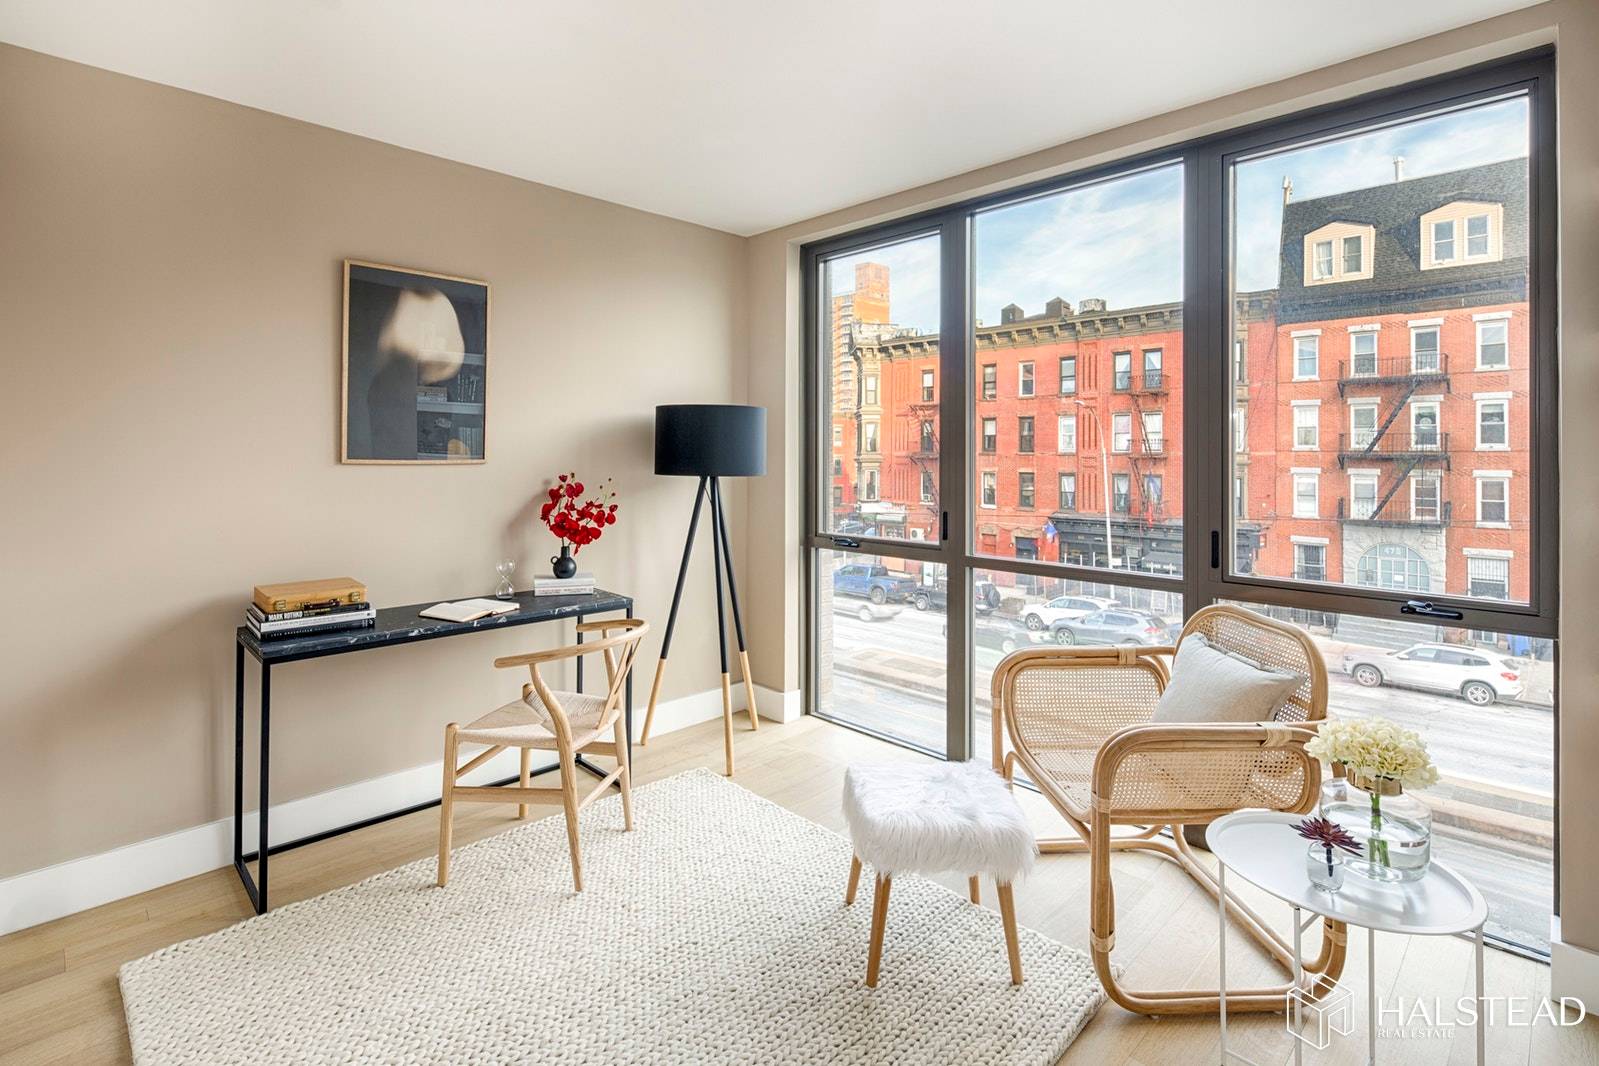 Uniquely situated where the vibrant community of Gowanus and the classic beauty of Park Slope converge, Bentyn marries clean contemporary aesthetics with thoughtful, curated finishes.